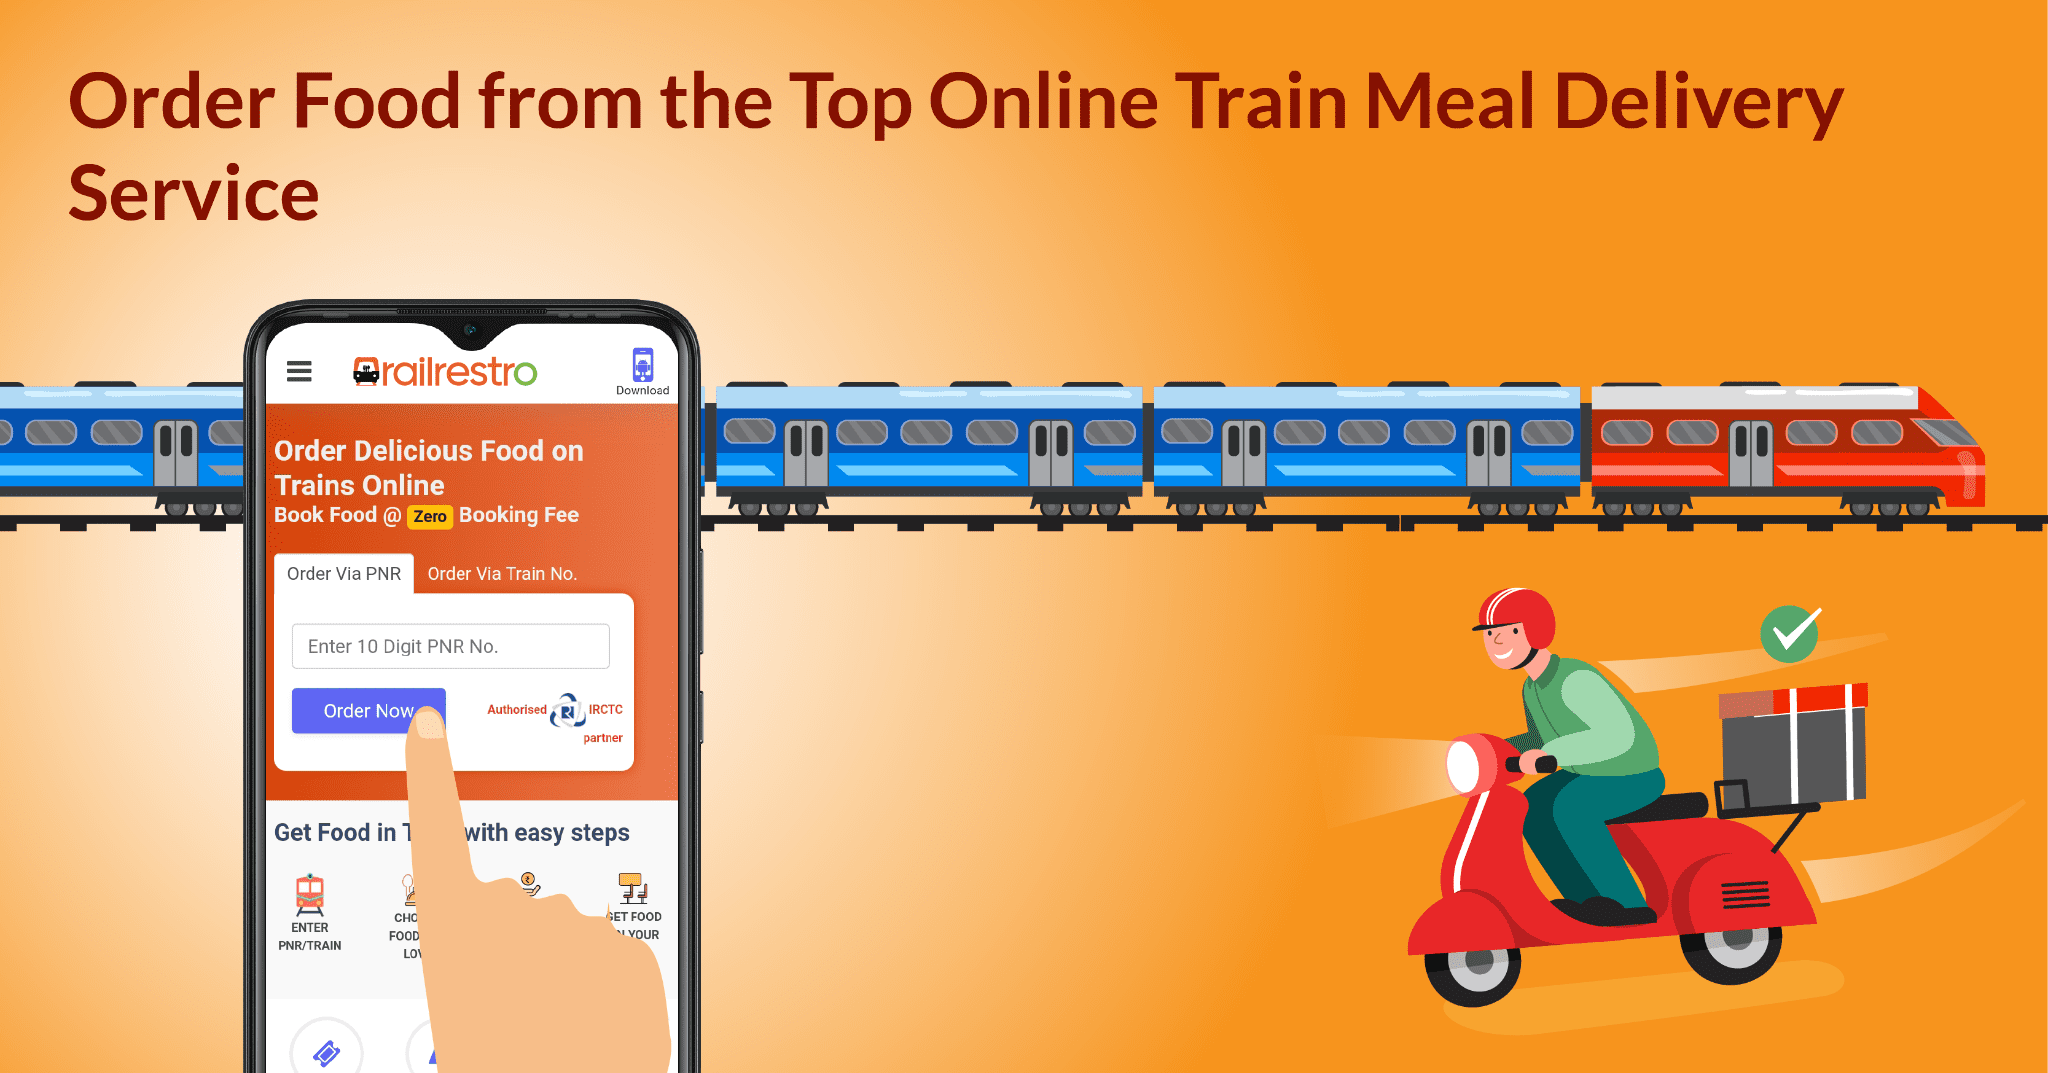 Order Food From the Top Online Train Meal Delivery Service